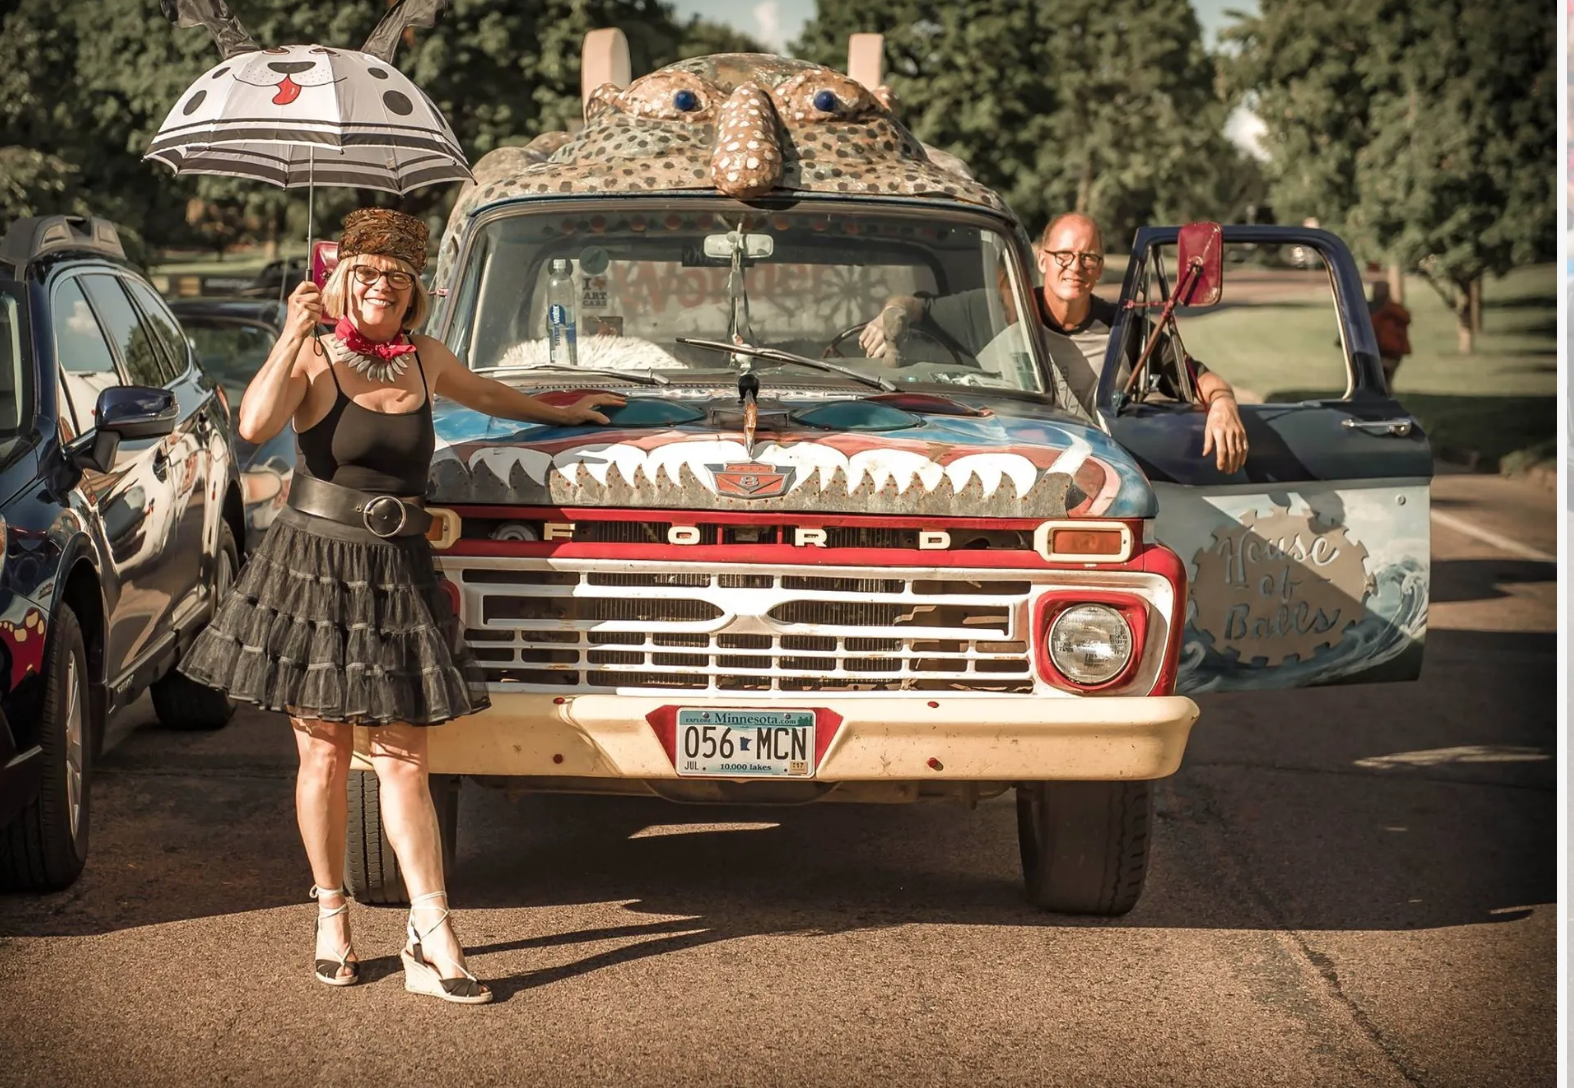 ArtCars at the Lake, Killer Mike, Treehouse Mega-Sale This Weeks Best Events image